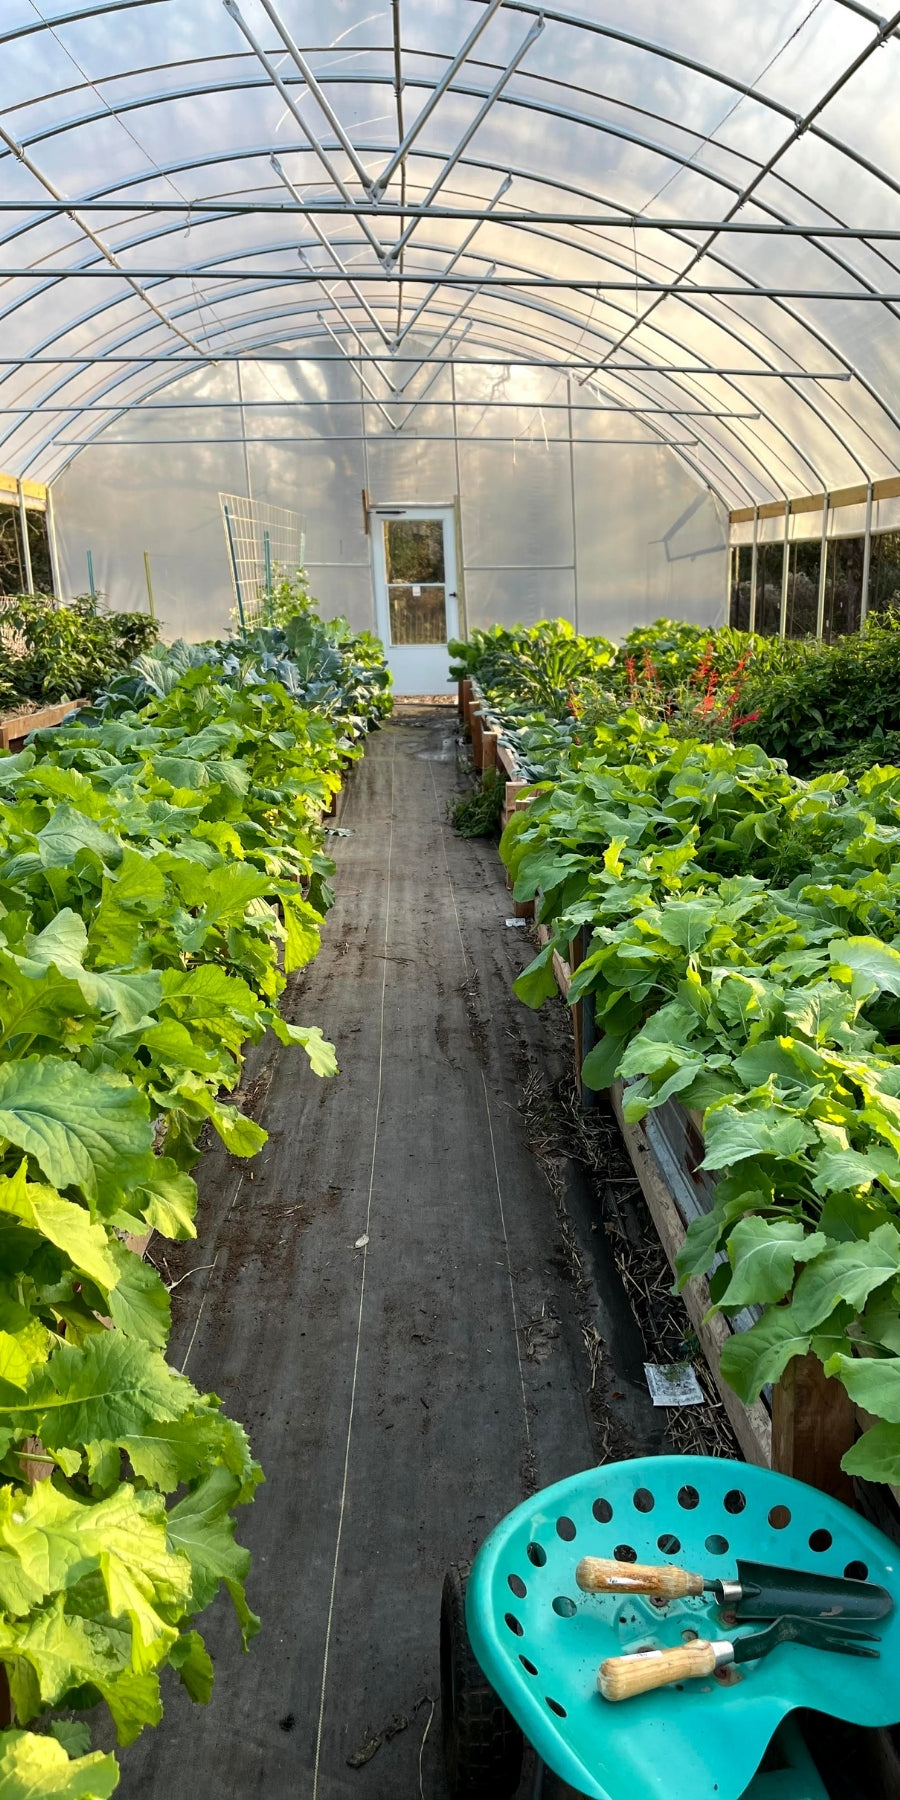 Grower's Solution - Greenhouse Kits, Nursery & Gardening Supplies, Irrigation Equipment, Shade Cloth, Ventilation, High Tunnels, NRCS Certified Houses, Jiffy Peat Pots, & More